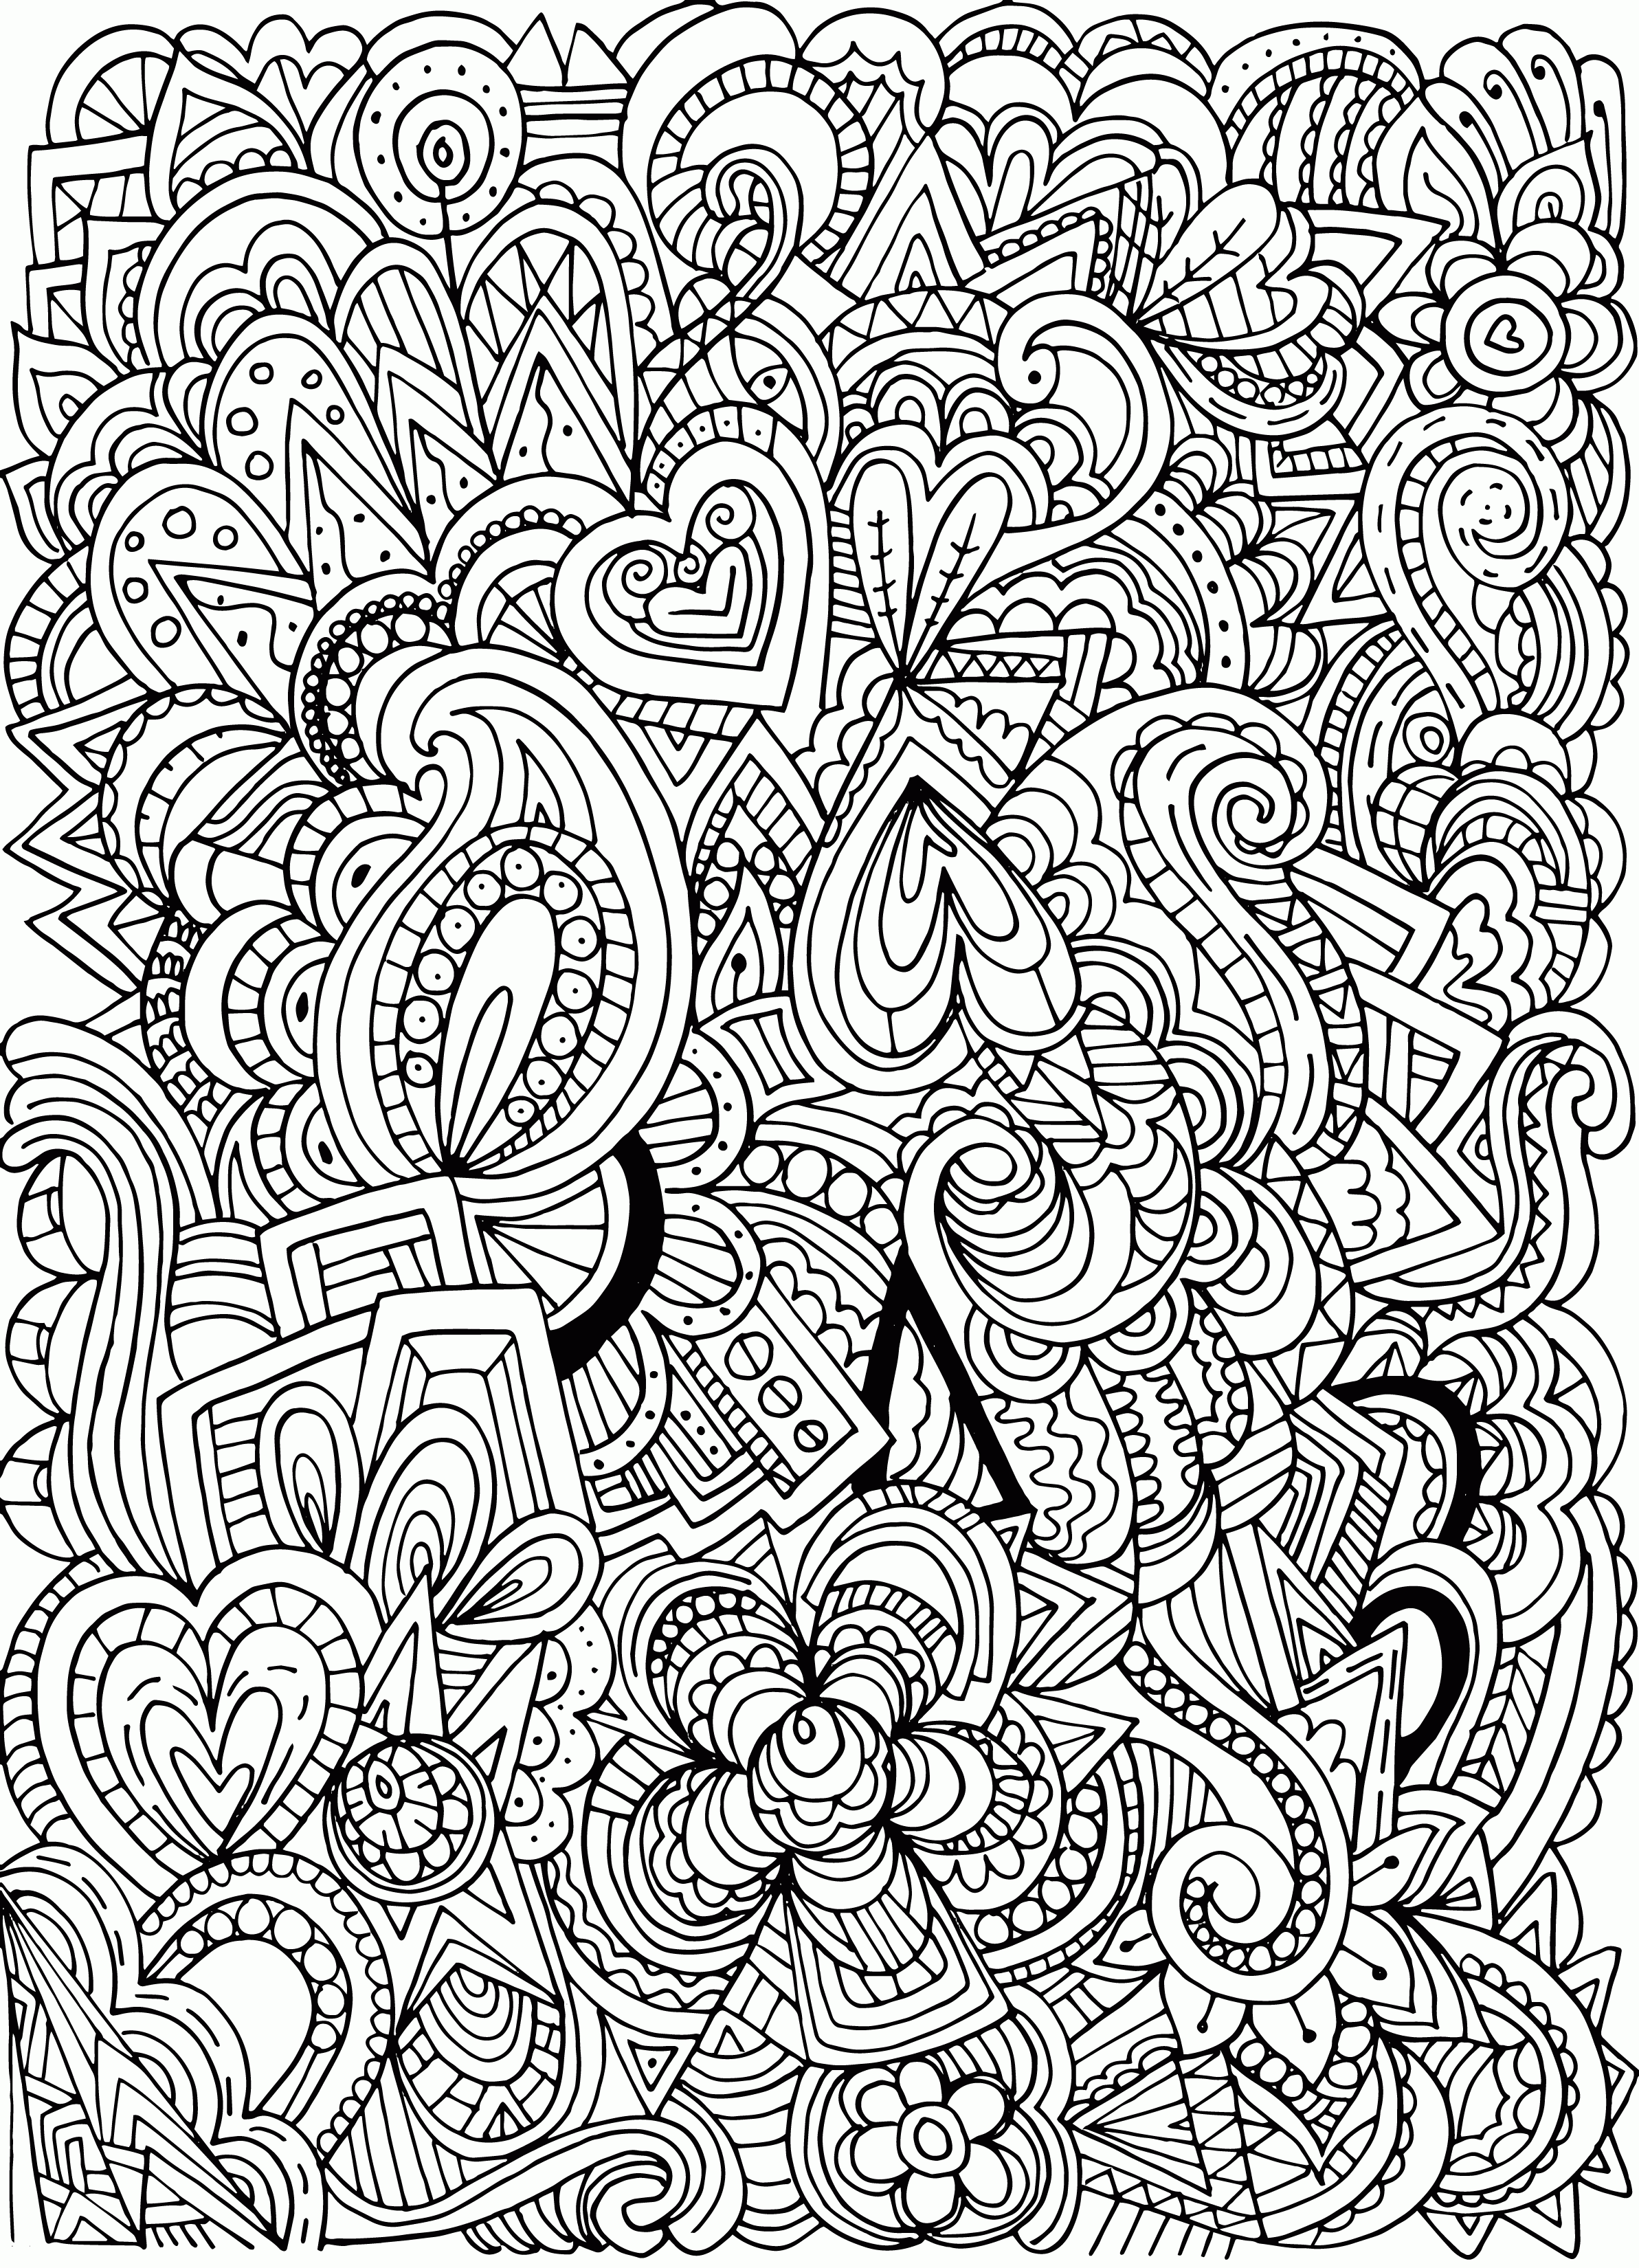 coloring patterns cupcakes pattern coloring page free printable coloring pages patterns coloring 